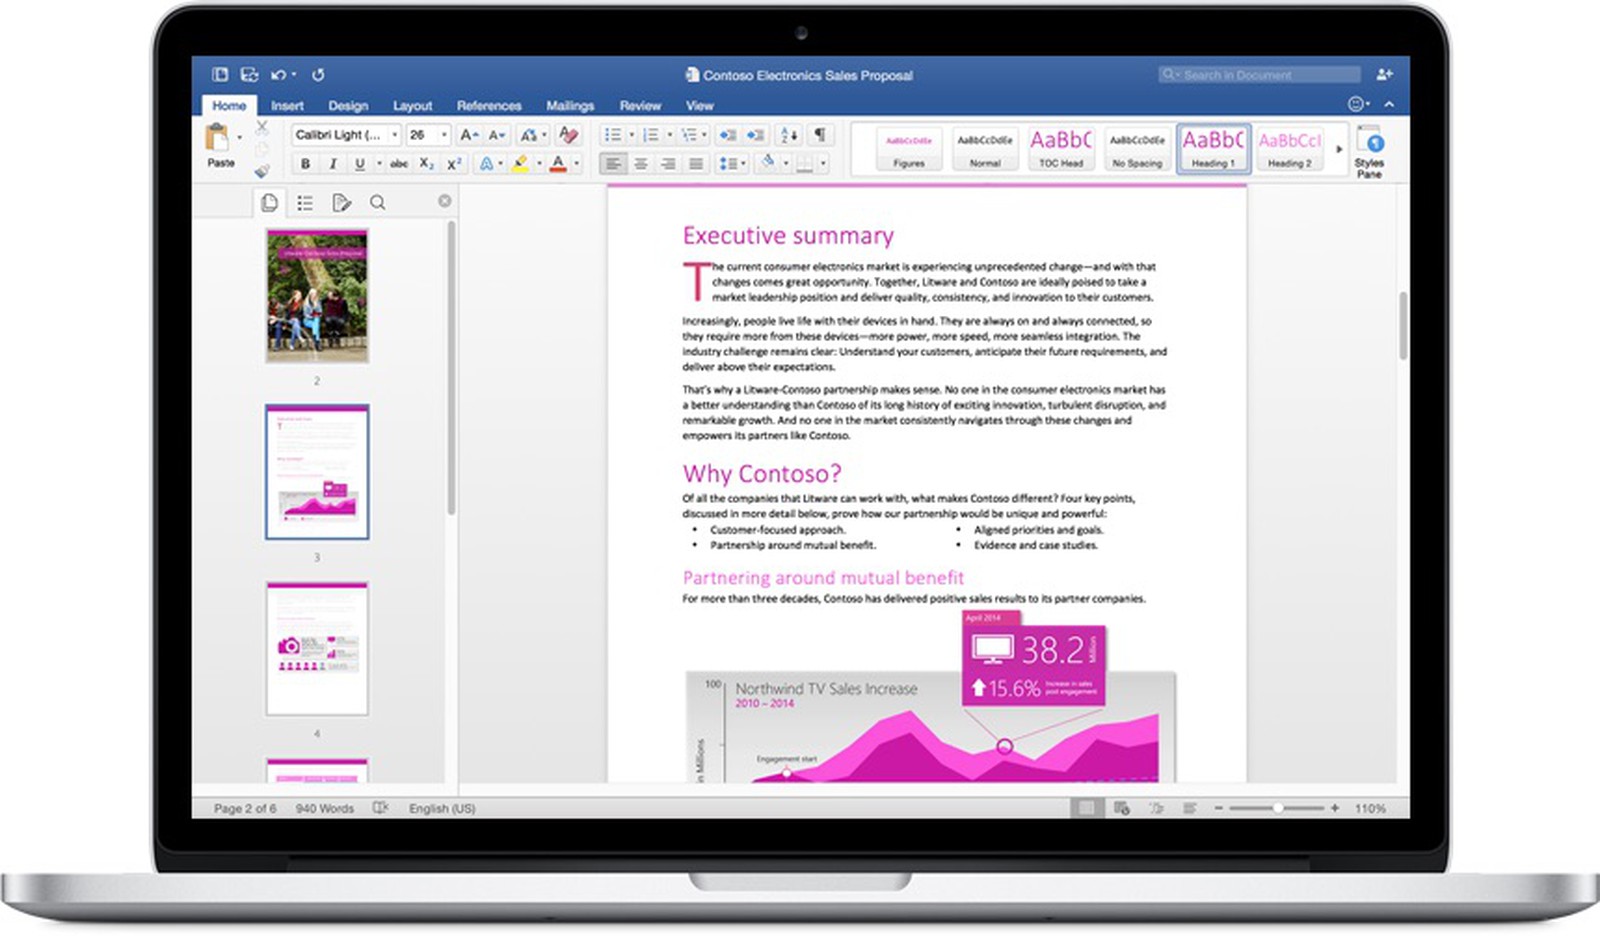 office 2016 for mac outlook rss